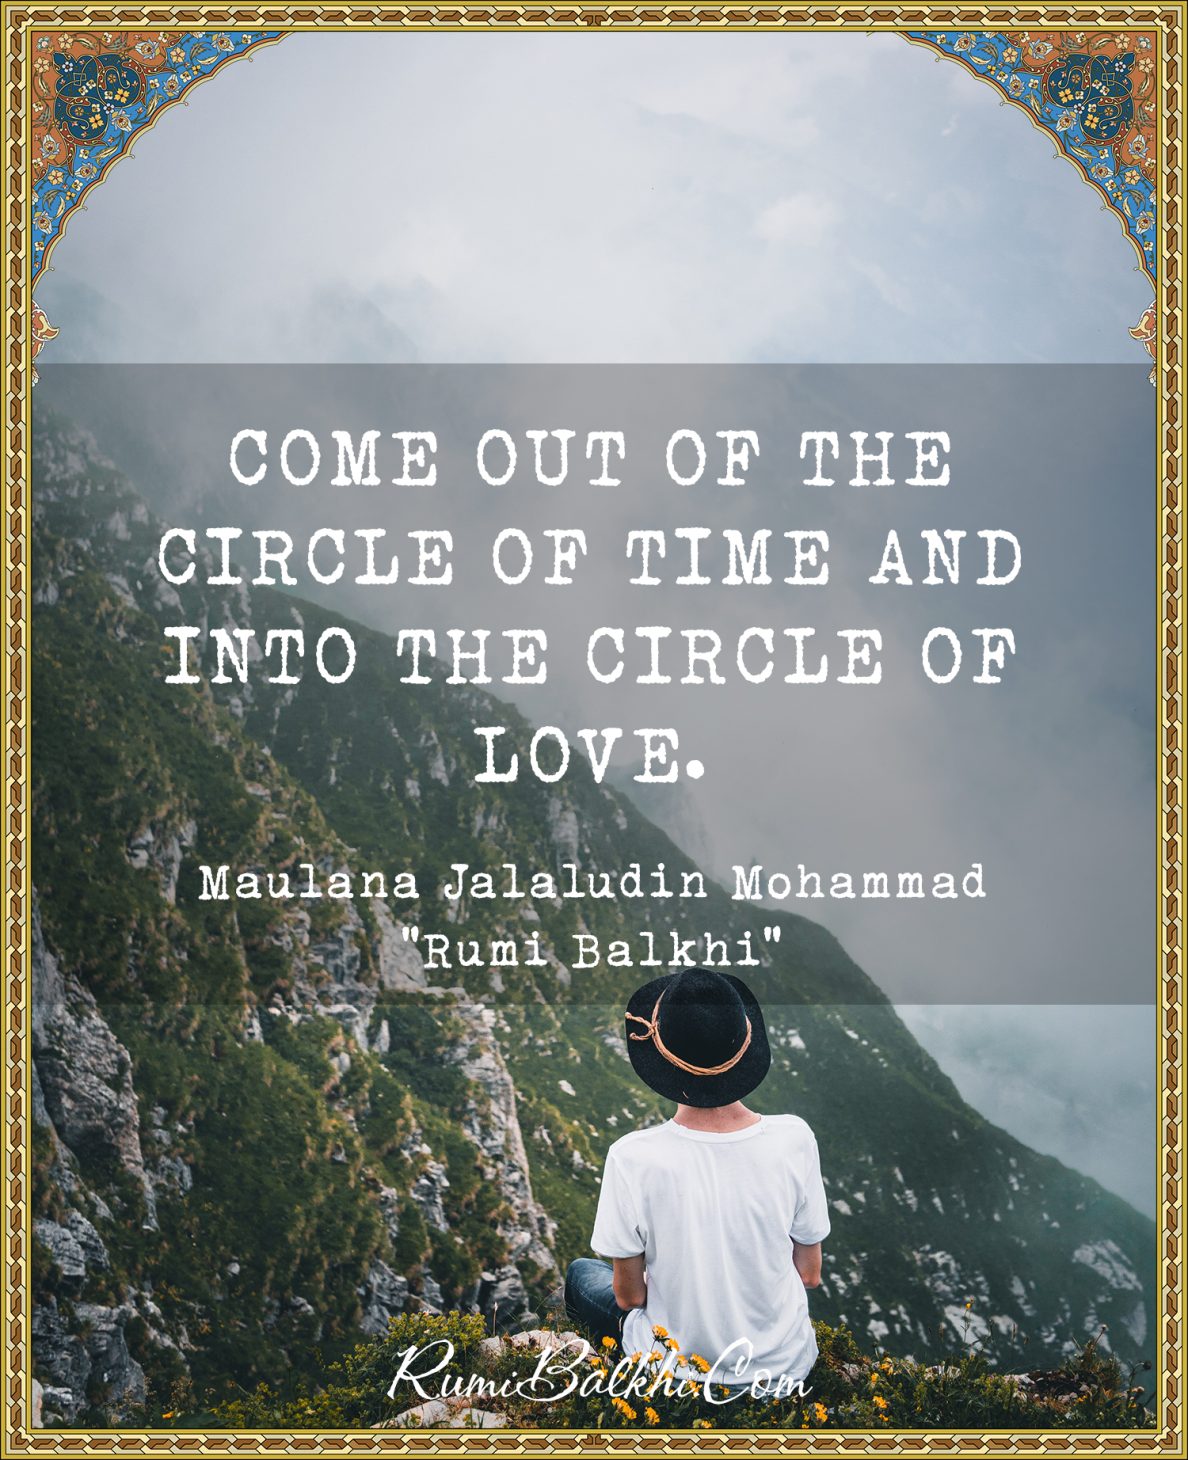 Come out of the circle of time and into the circle of love